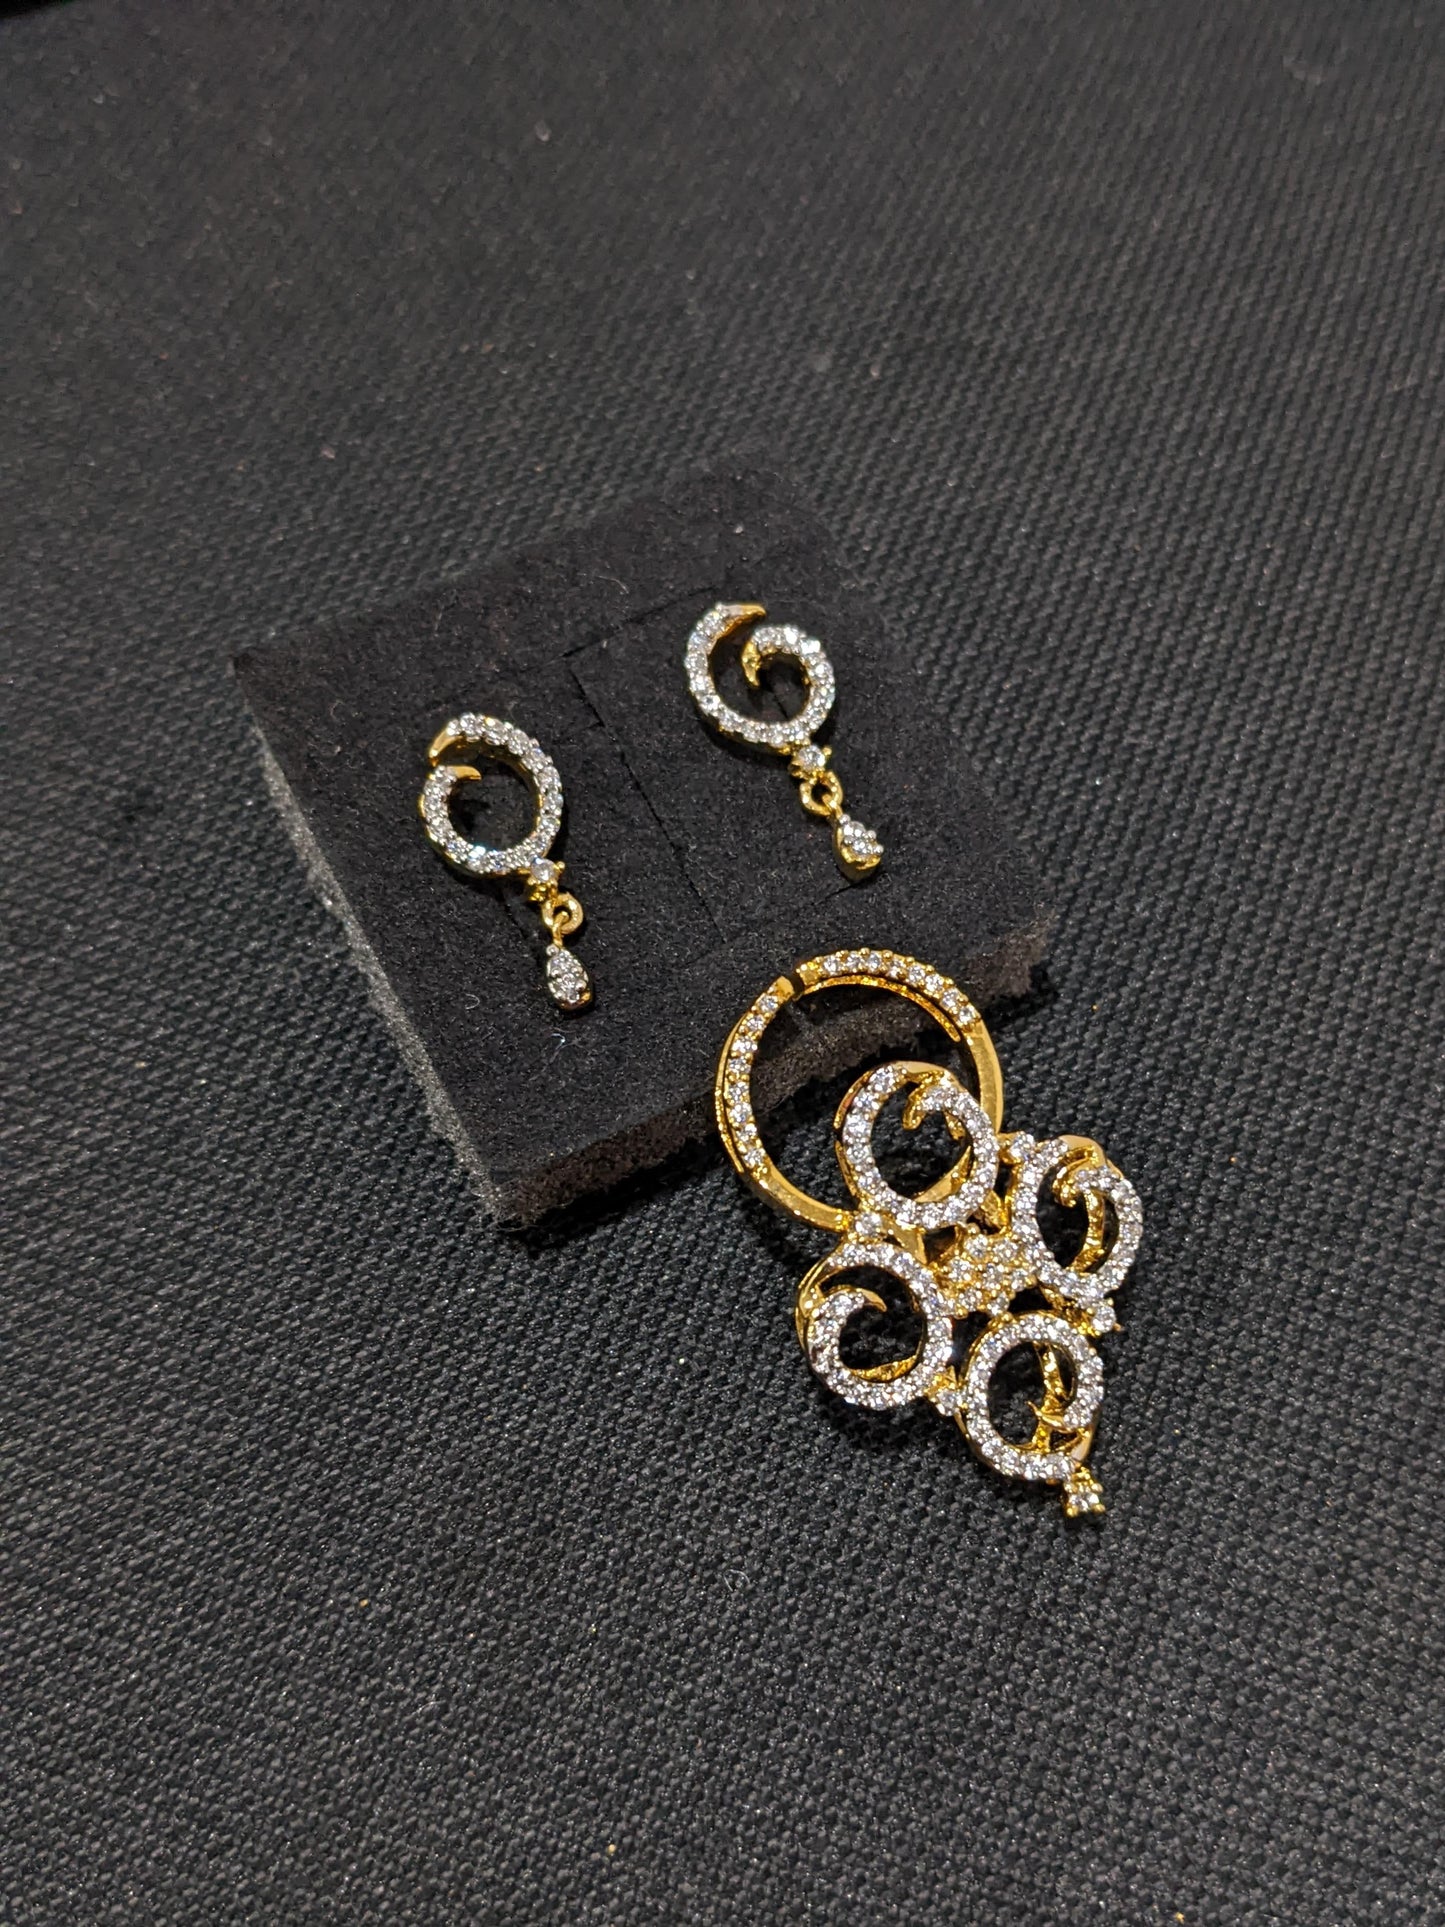 Curly design Small Pendant and Stud Earrings Set